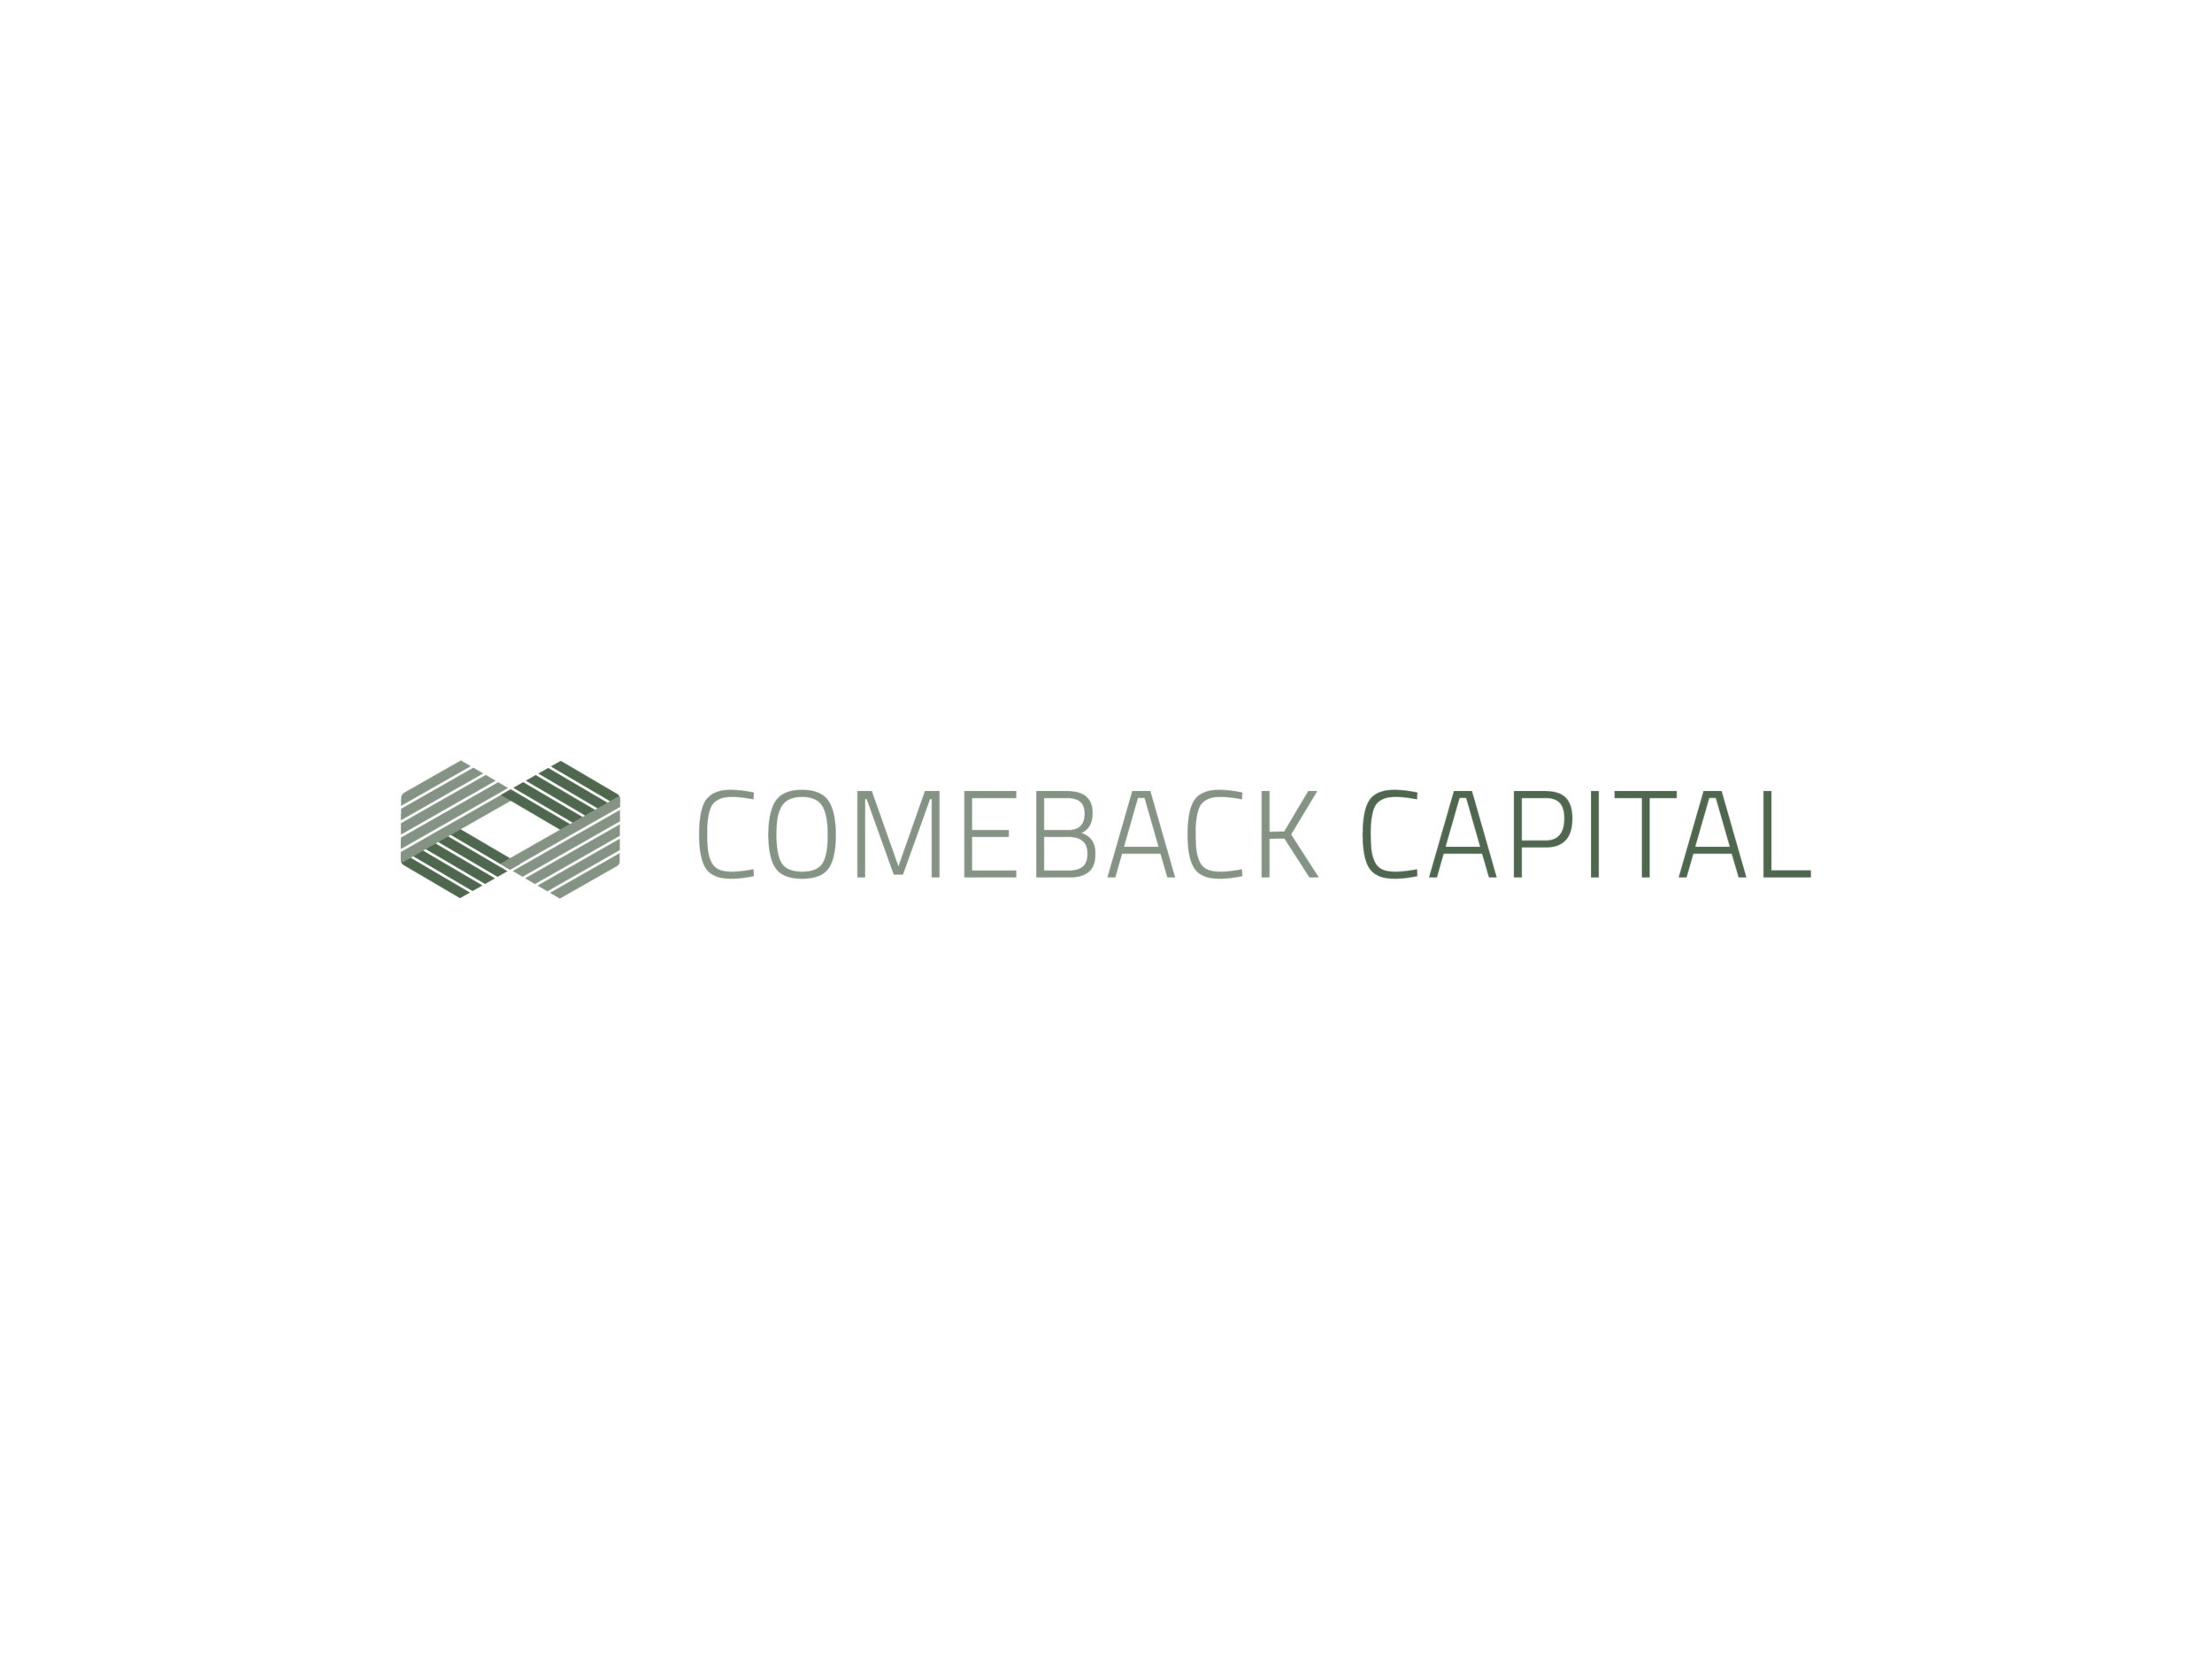 Comeback Capital-750px-01.png